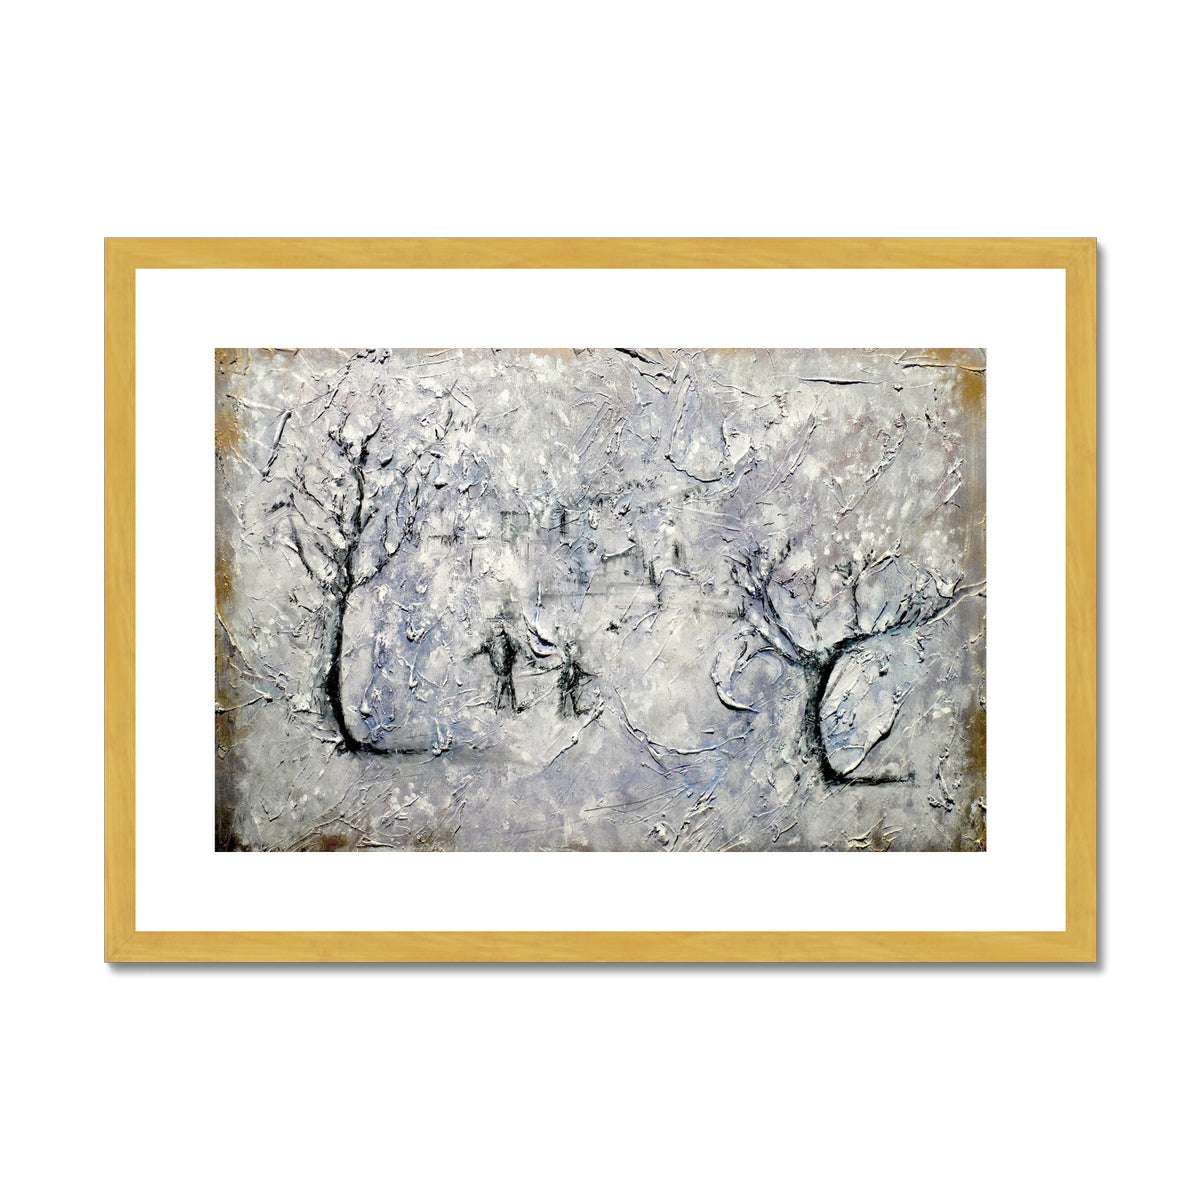 Father Daughter Snow Painting | Antique Framed & Mounted Prints From Scotland-Antique Framed & Mounted Prints-Abstract & Impressionistic Art Gallery-A2 Landscape-Gold Frame-Paintings, Prints, Homeware, Art Gifts From Scotland By Scottish Artist Kevin Hunter